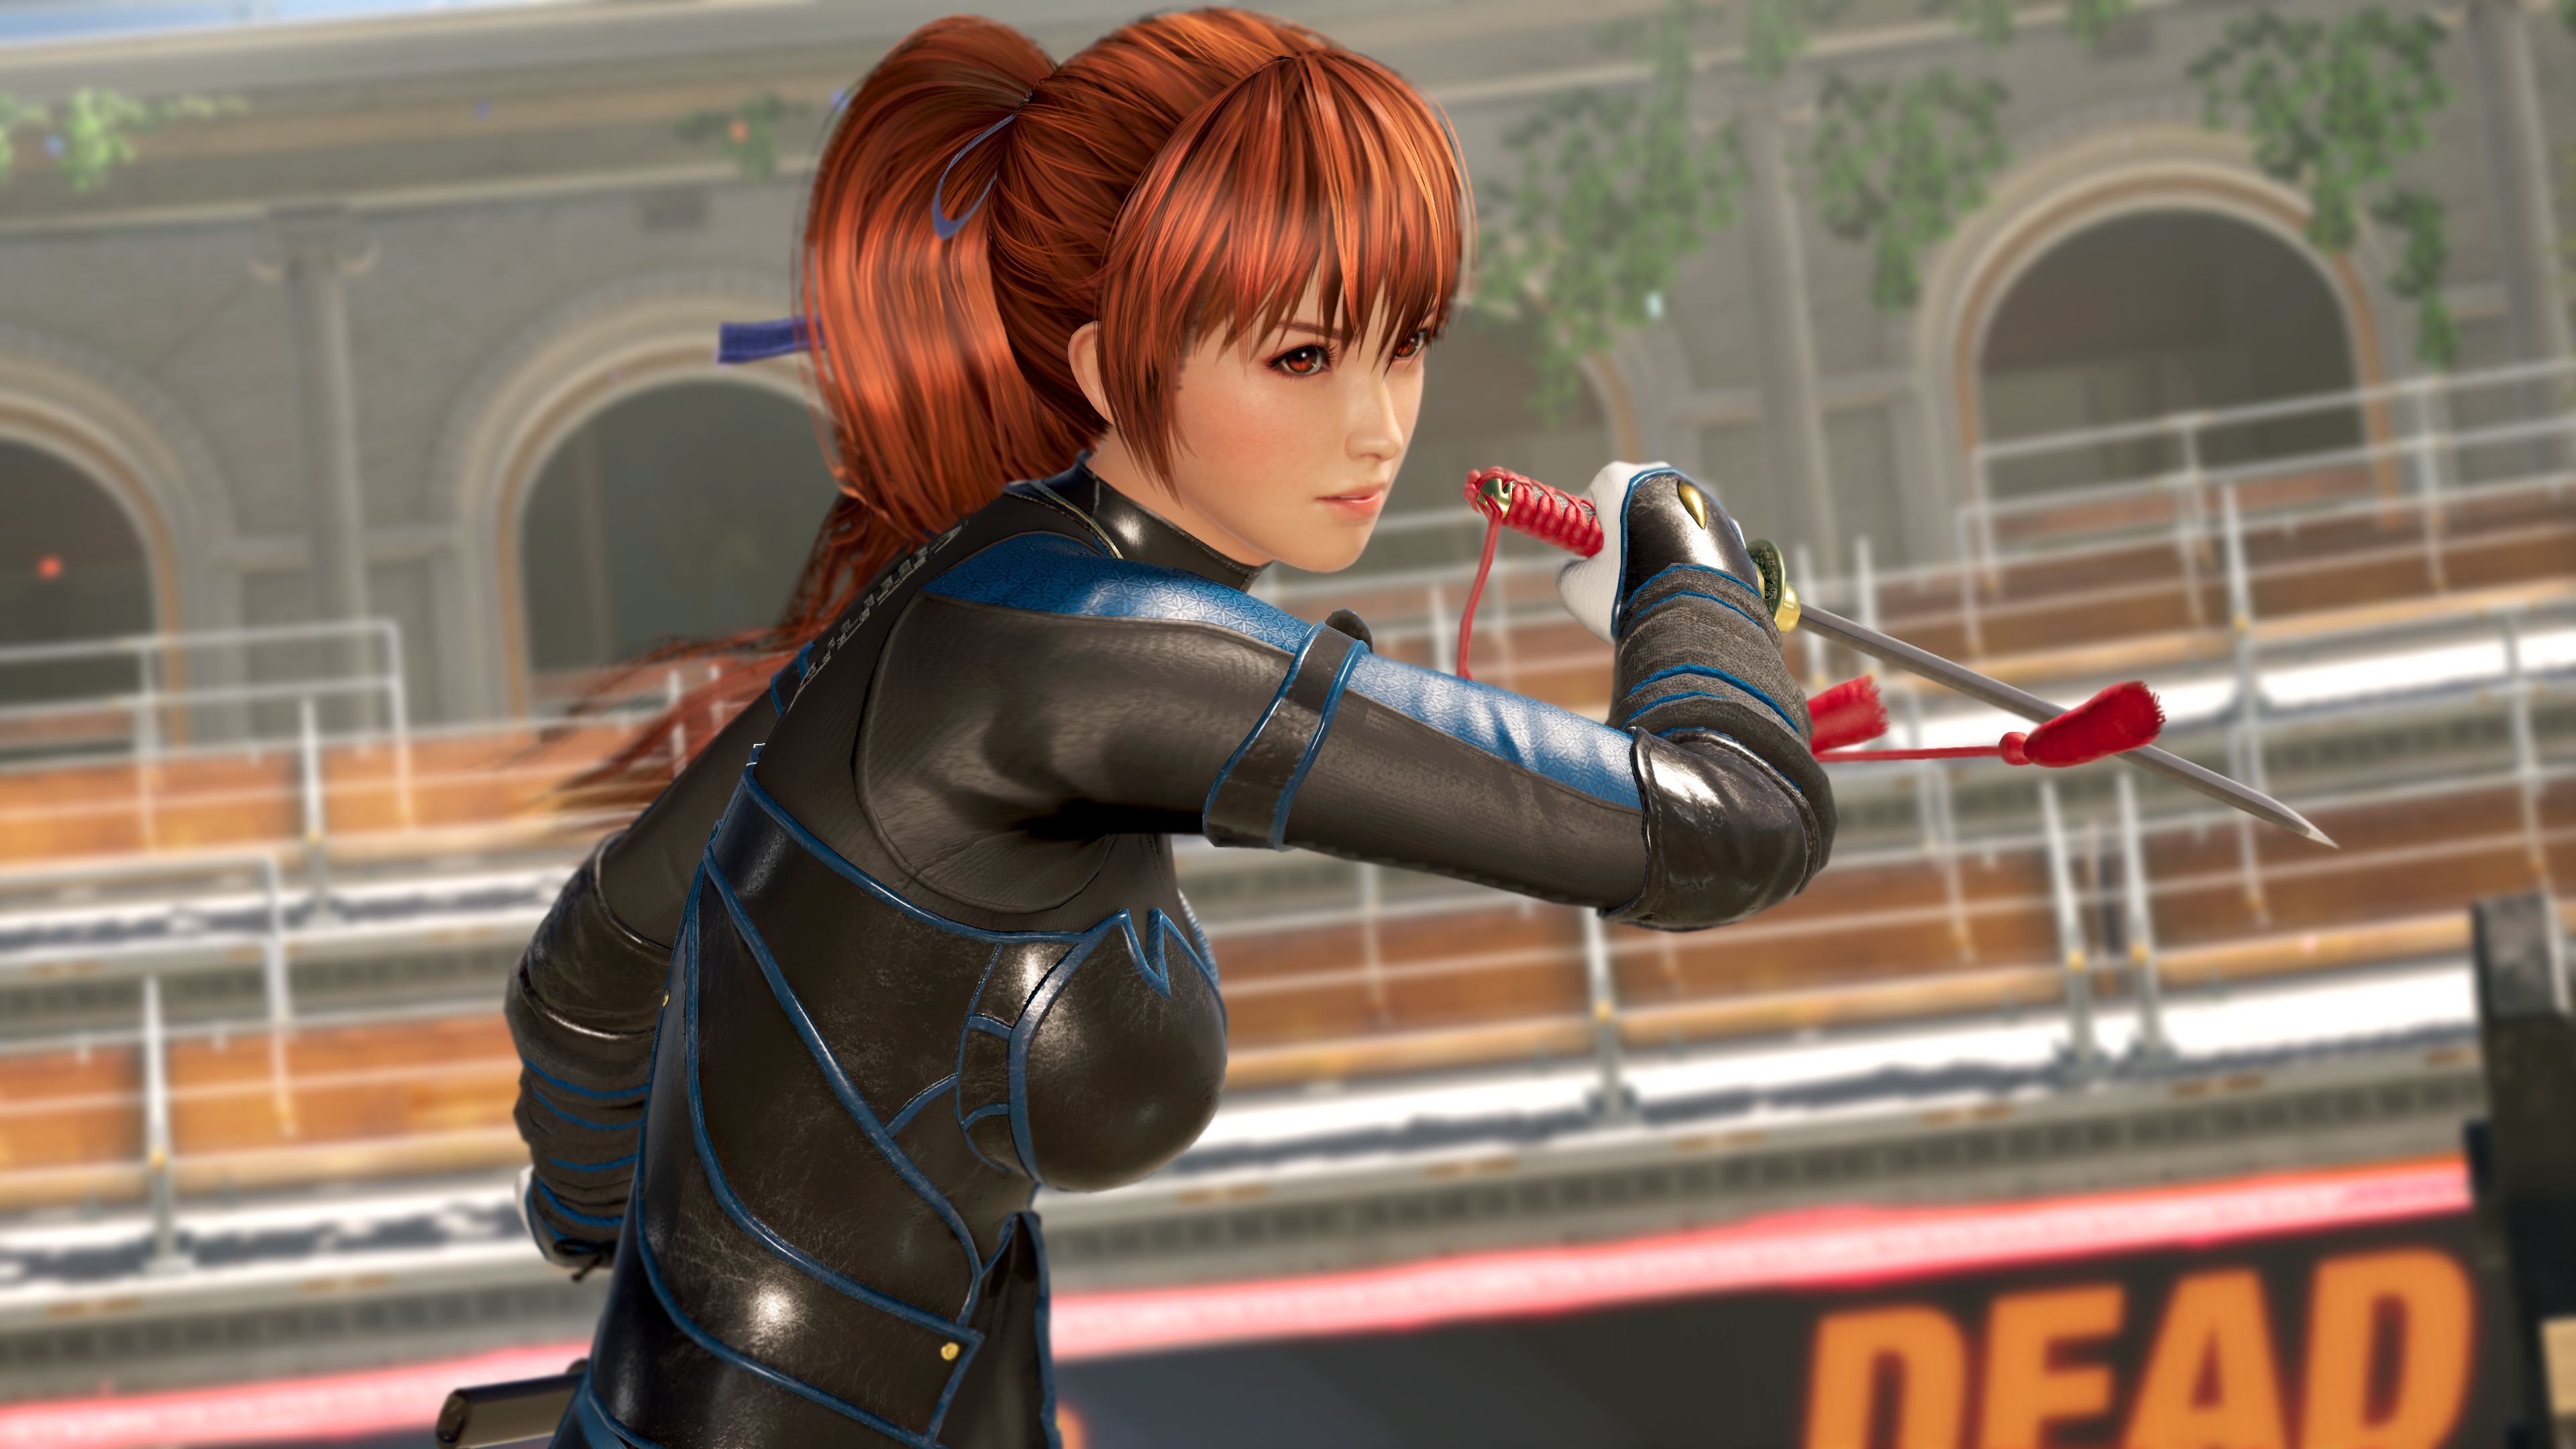 2560x1440 Dead Or Alive 6 Game 2019 1440p Resolution Wallpaper Hd